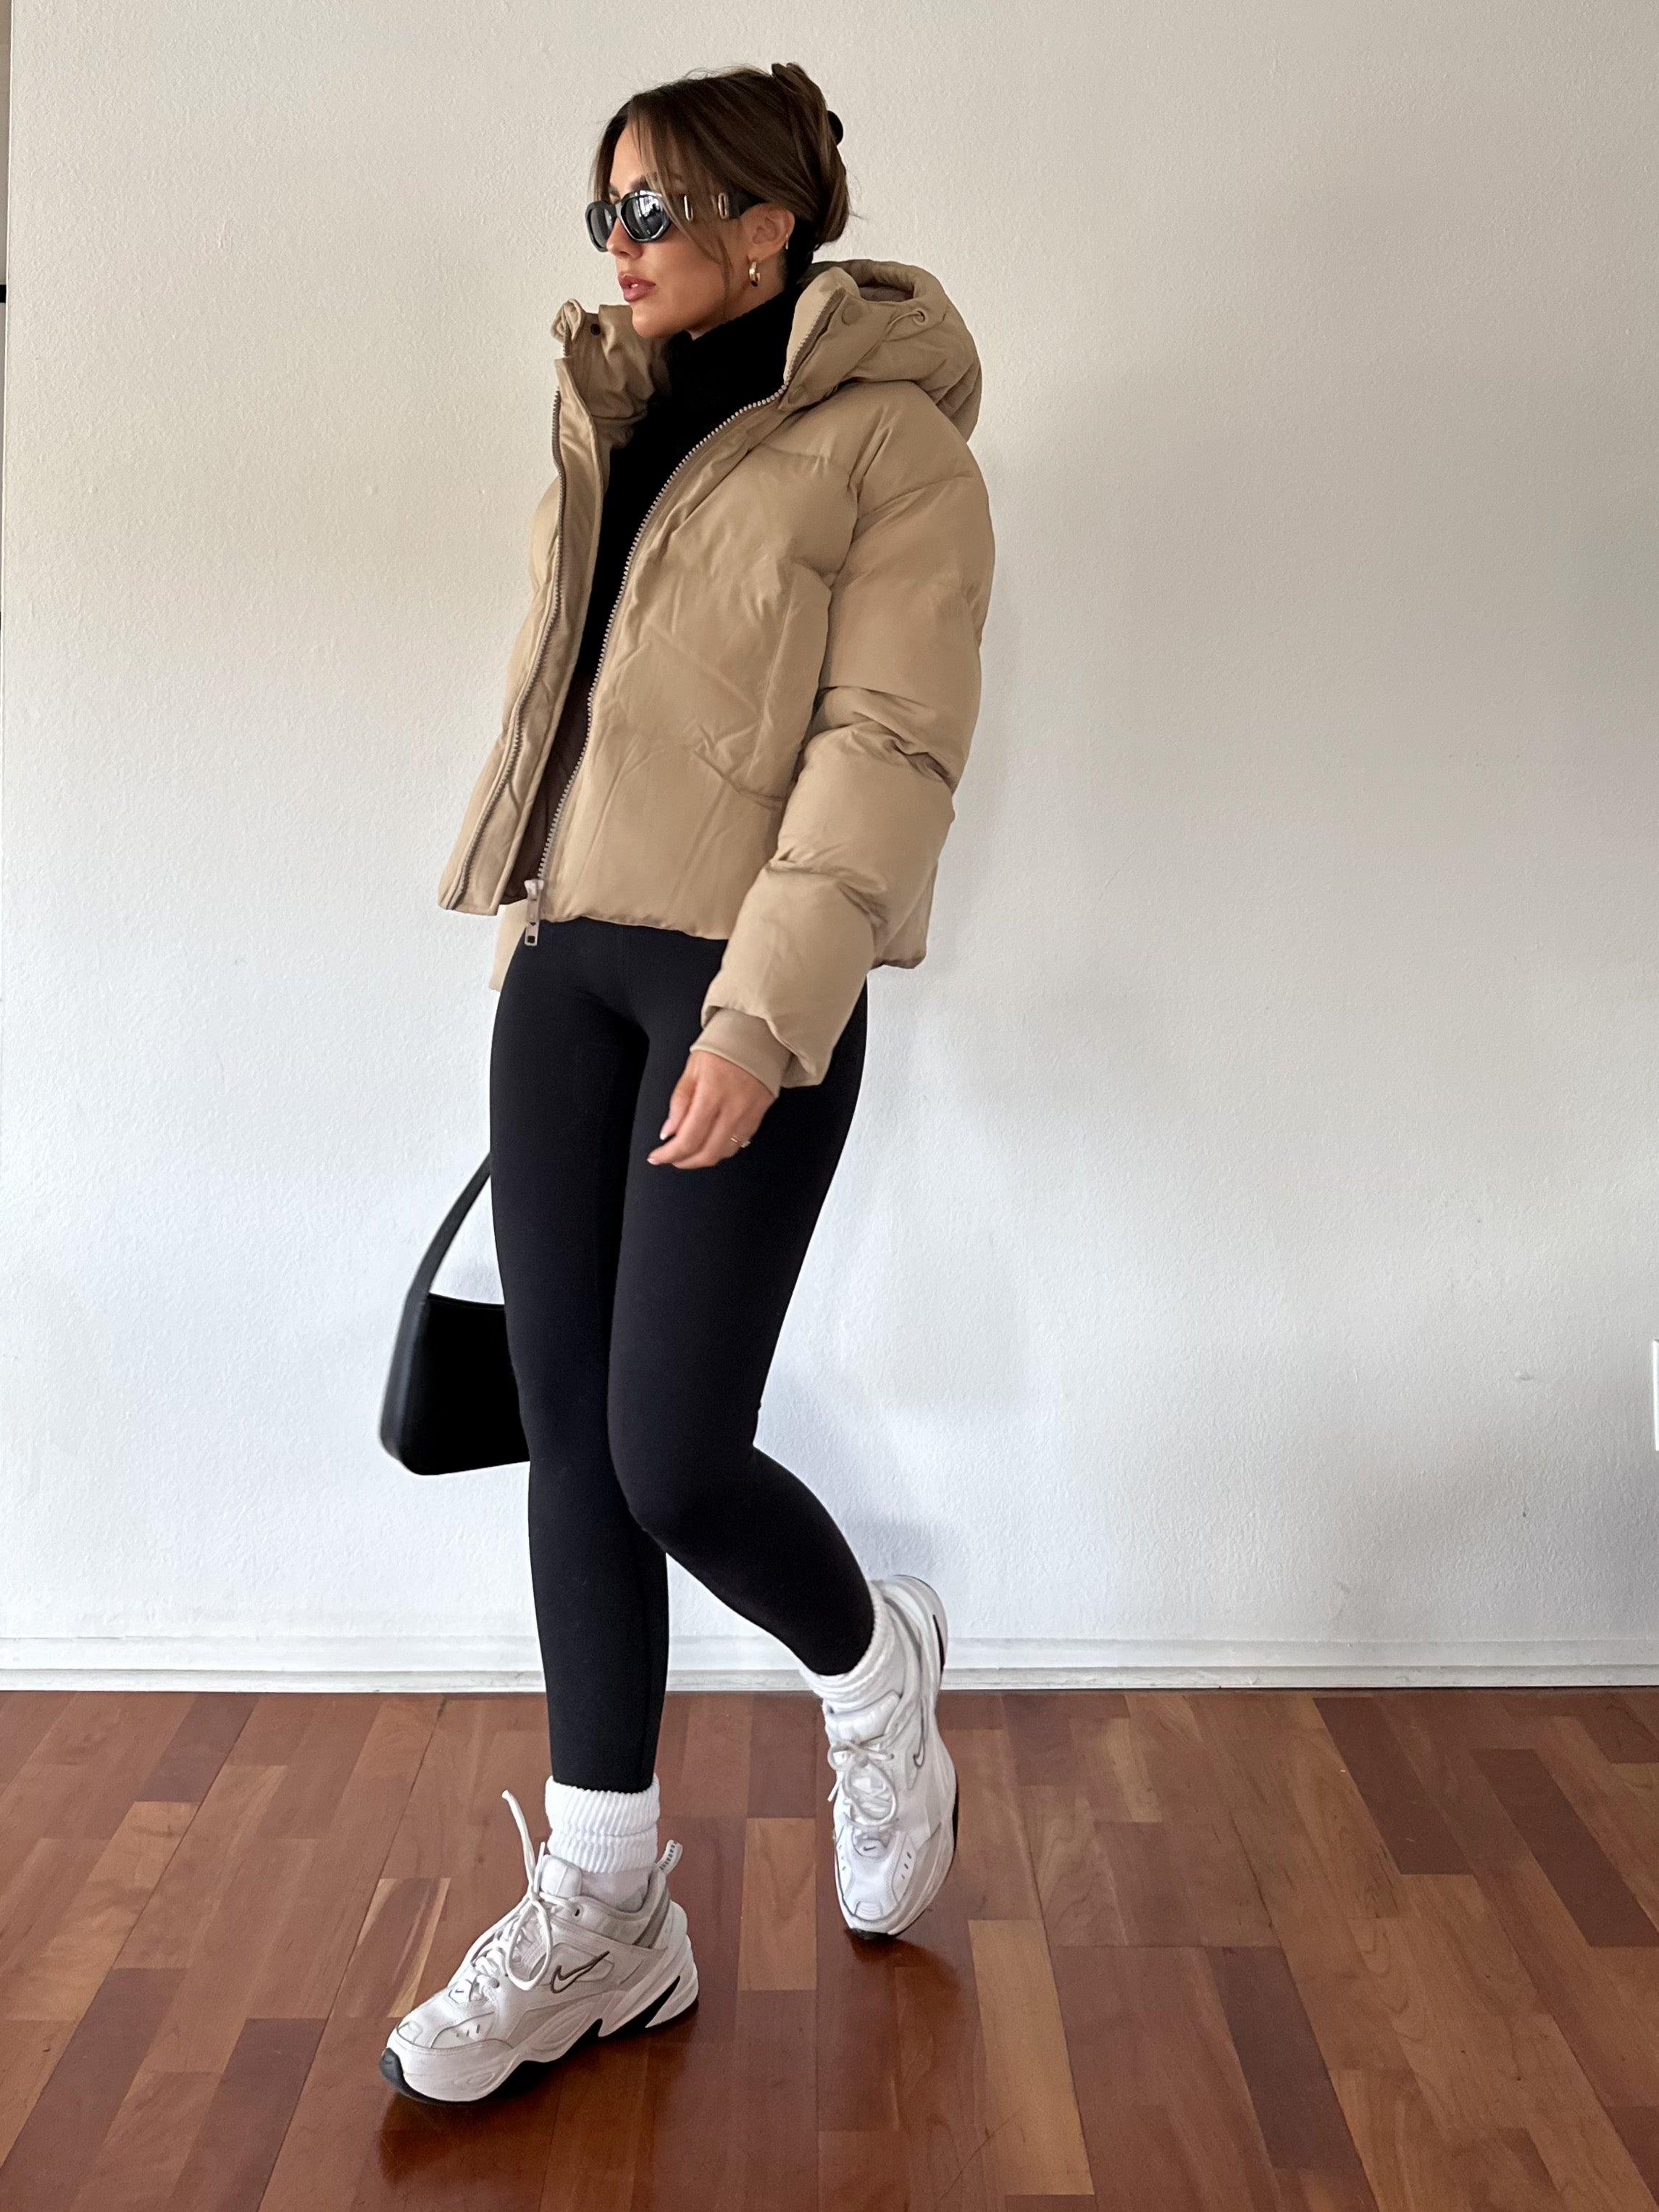 beige-sherpa-bomber-jacket-outfit-leggings-ankle-boots-lr-3-2